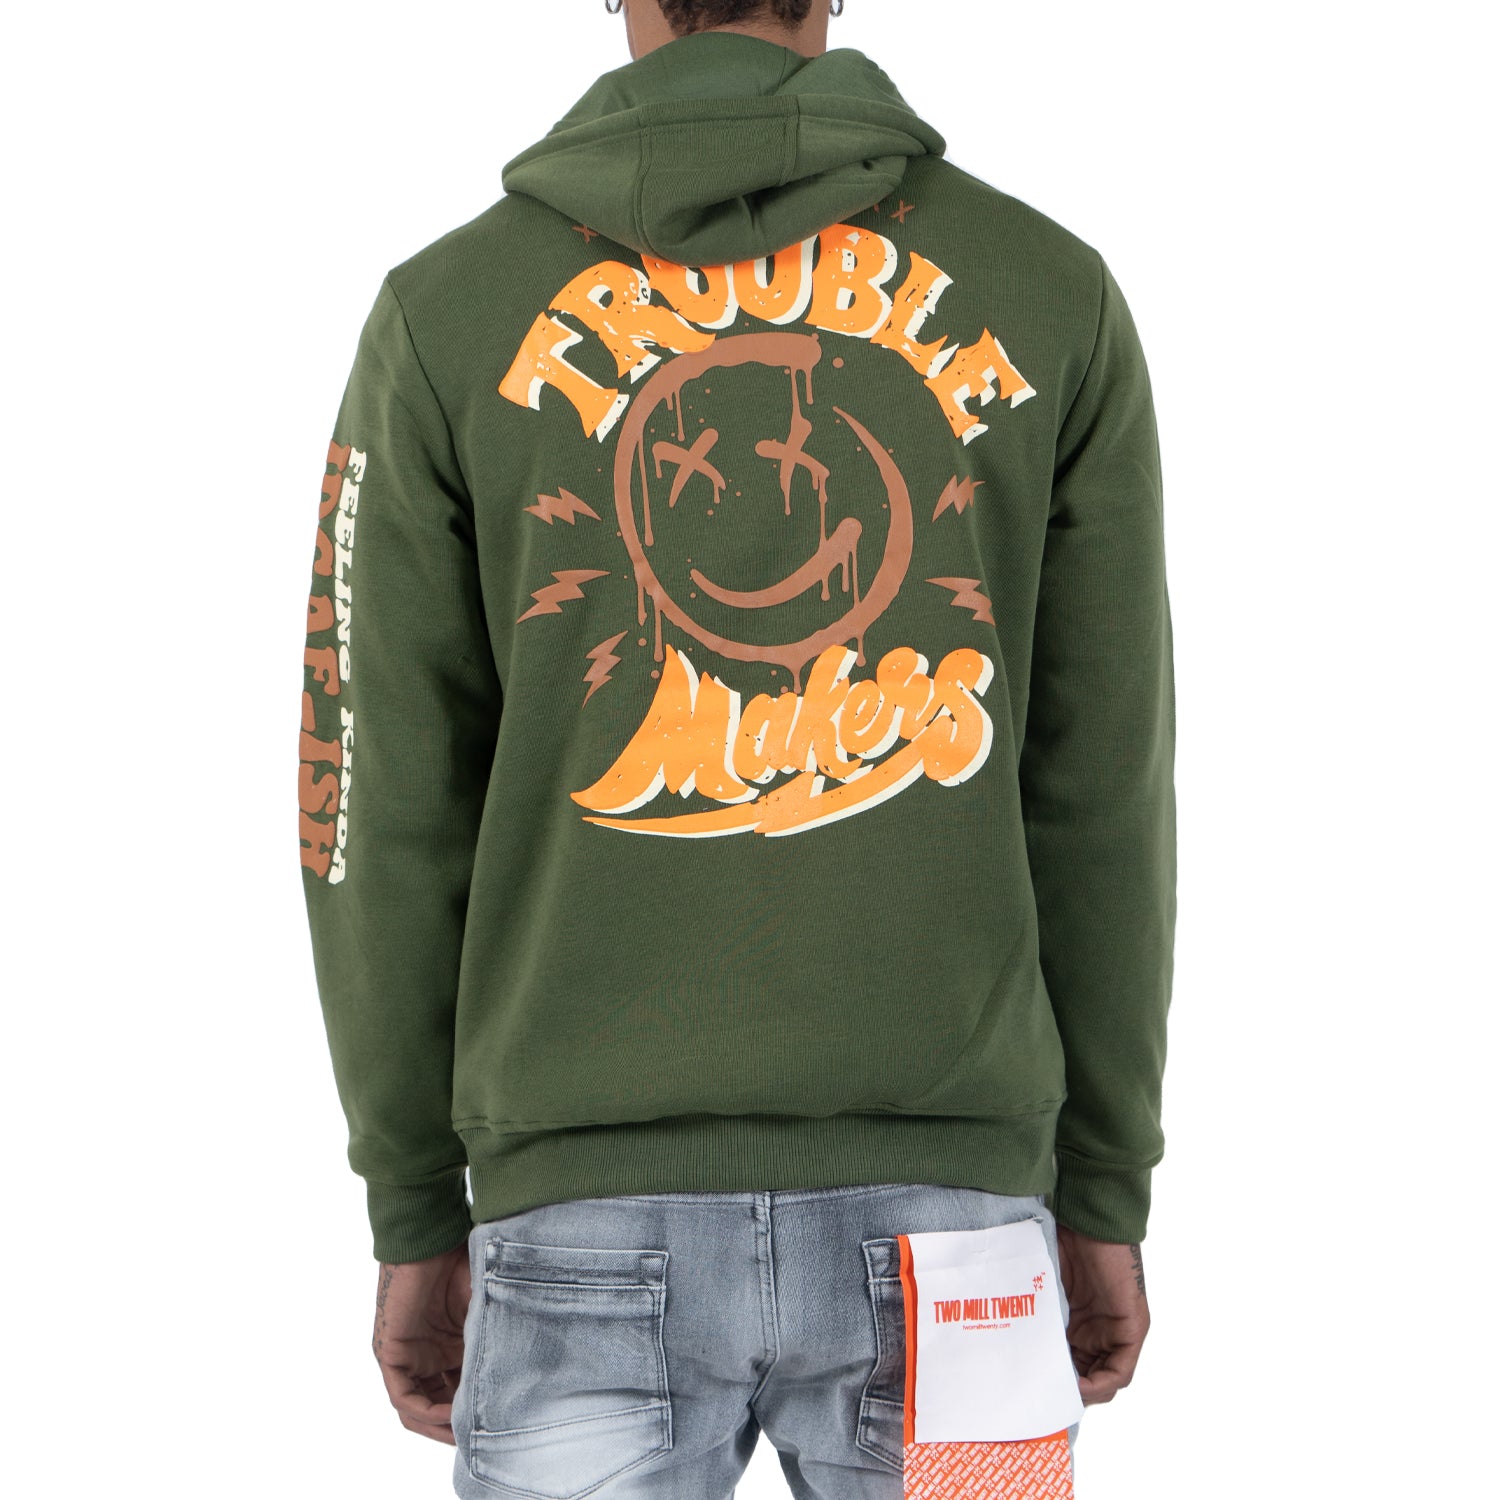 Men's Trouble Maker Pullover Hoodie | Olive